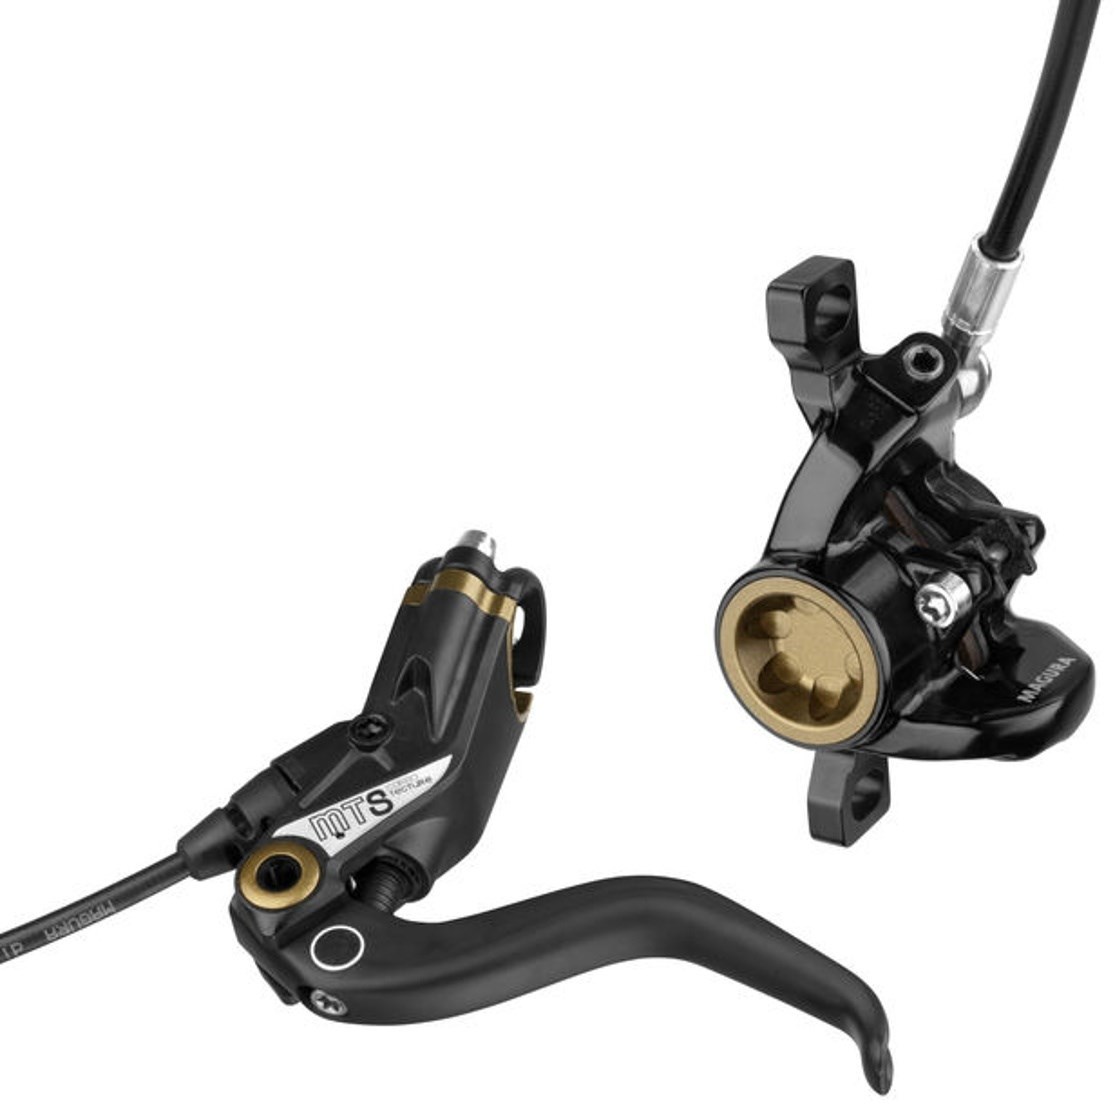 Magura MTS Disc Brake With Storm SL Rotor product image